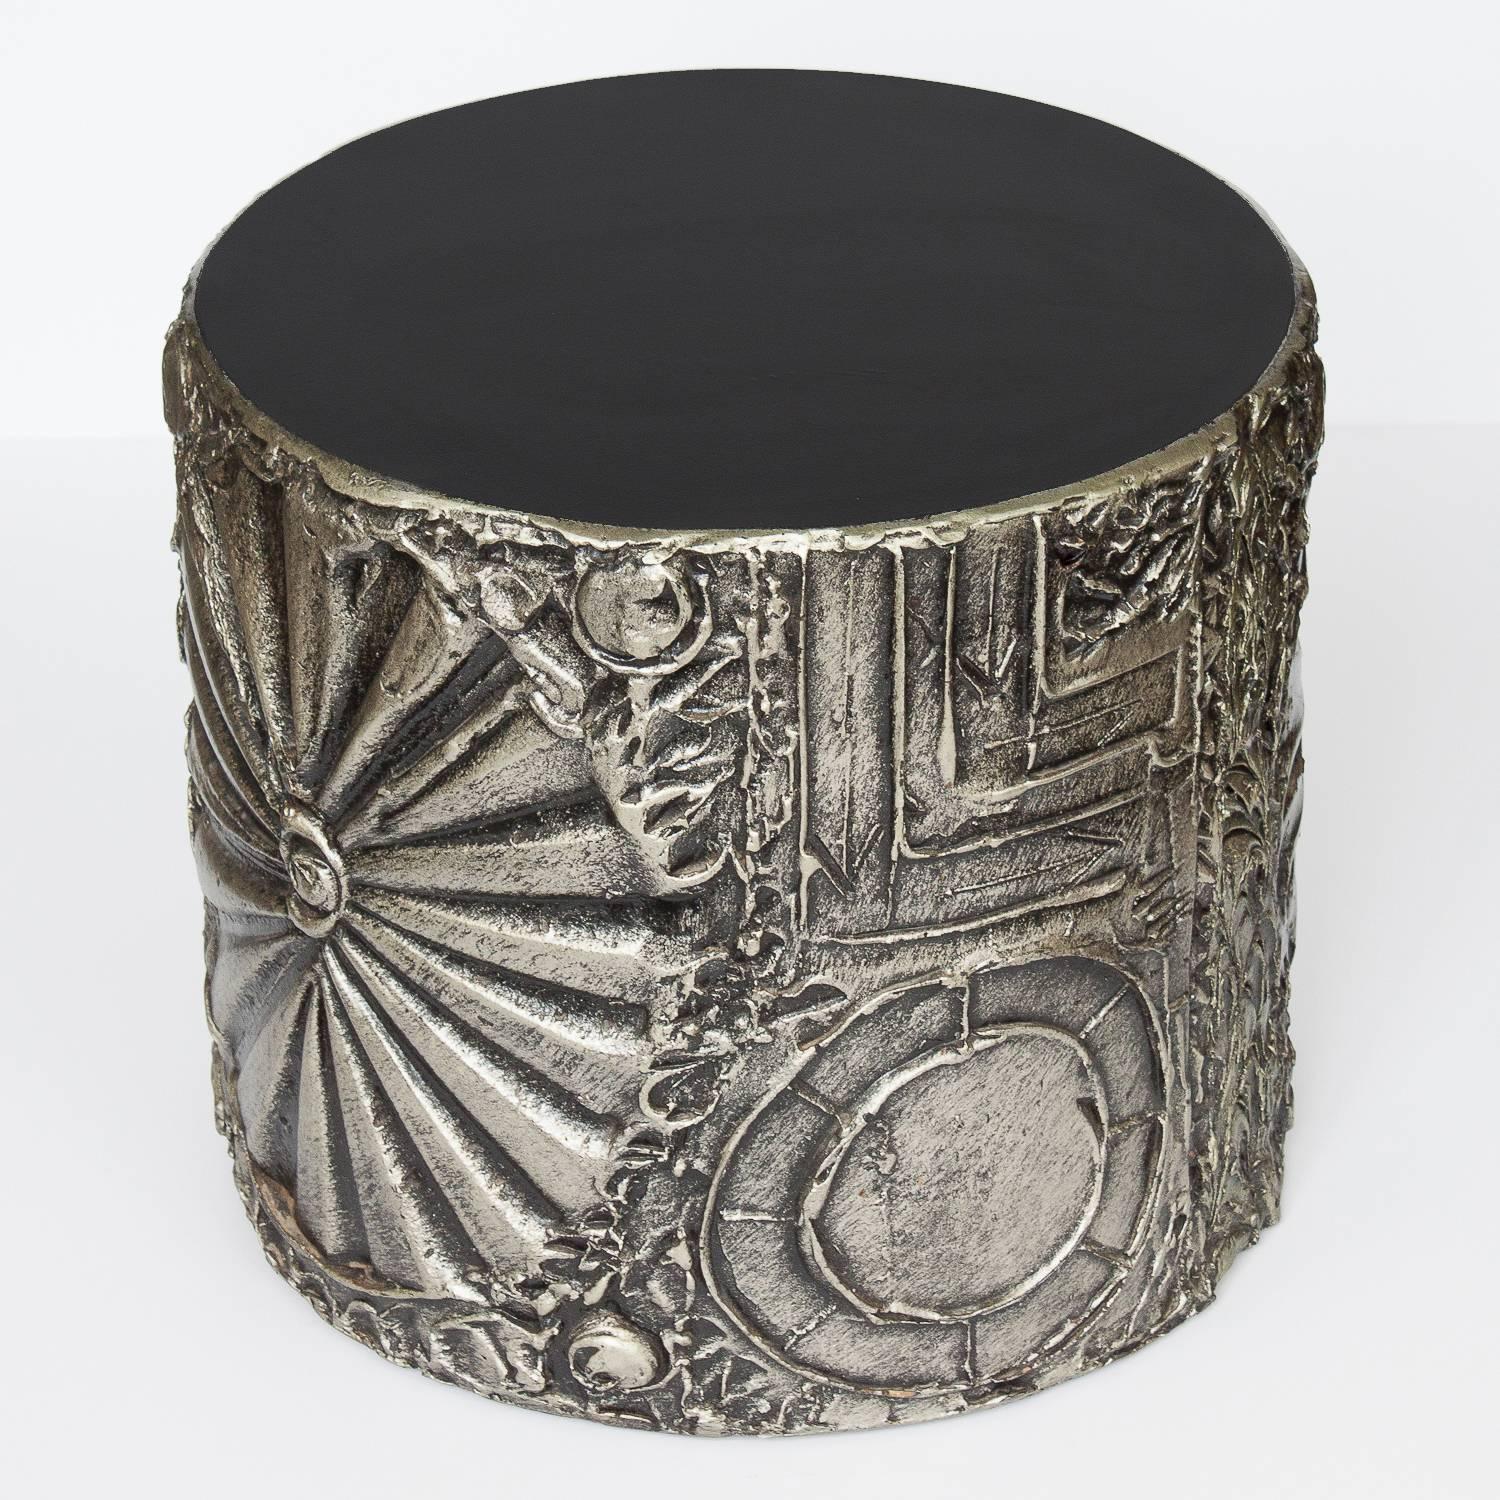 Paying homage to 'Paul Evans' sculpted bronze series, this Brutalist drum table by Adrian Pearsall features black laminate top and abstract motifs in a sculpted resin. The table is decorated in a high relief sculptural warm silver and black resin.